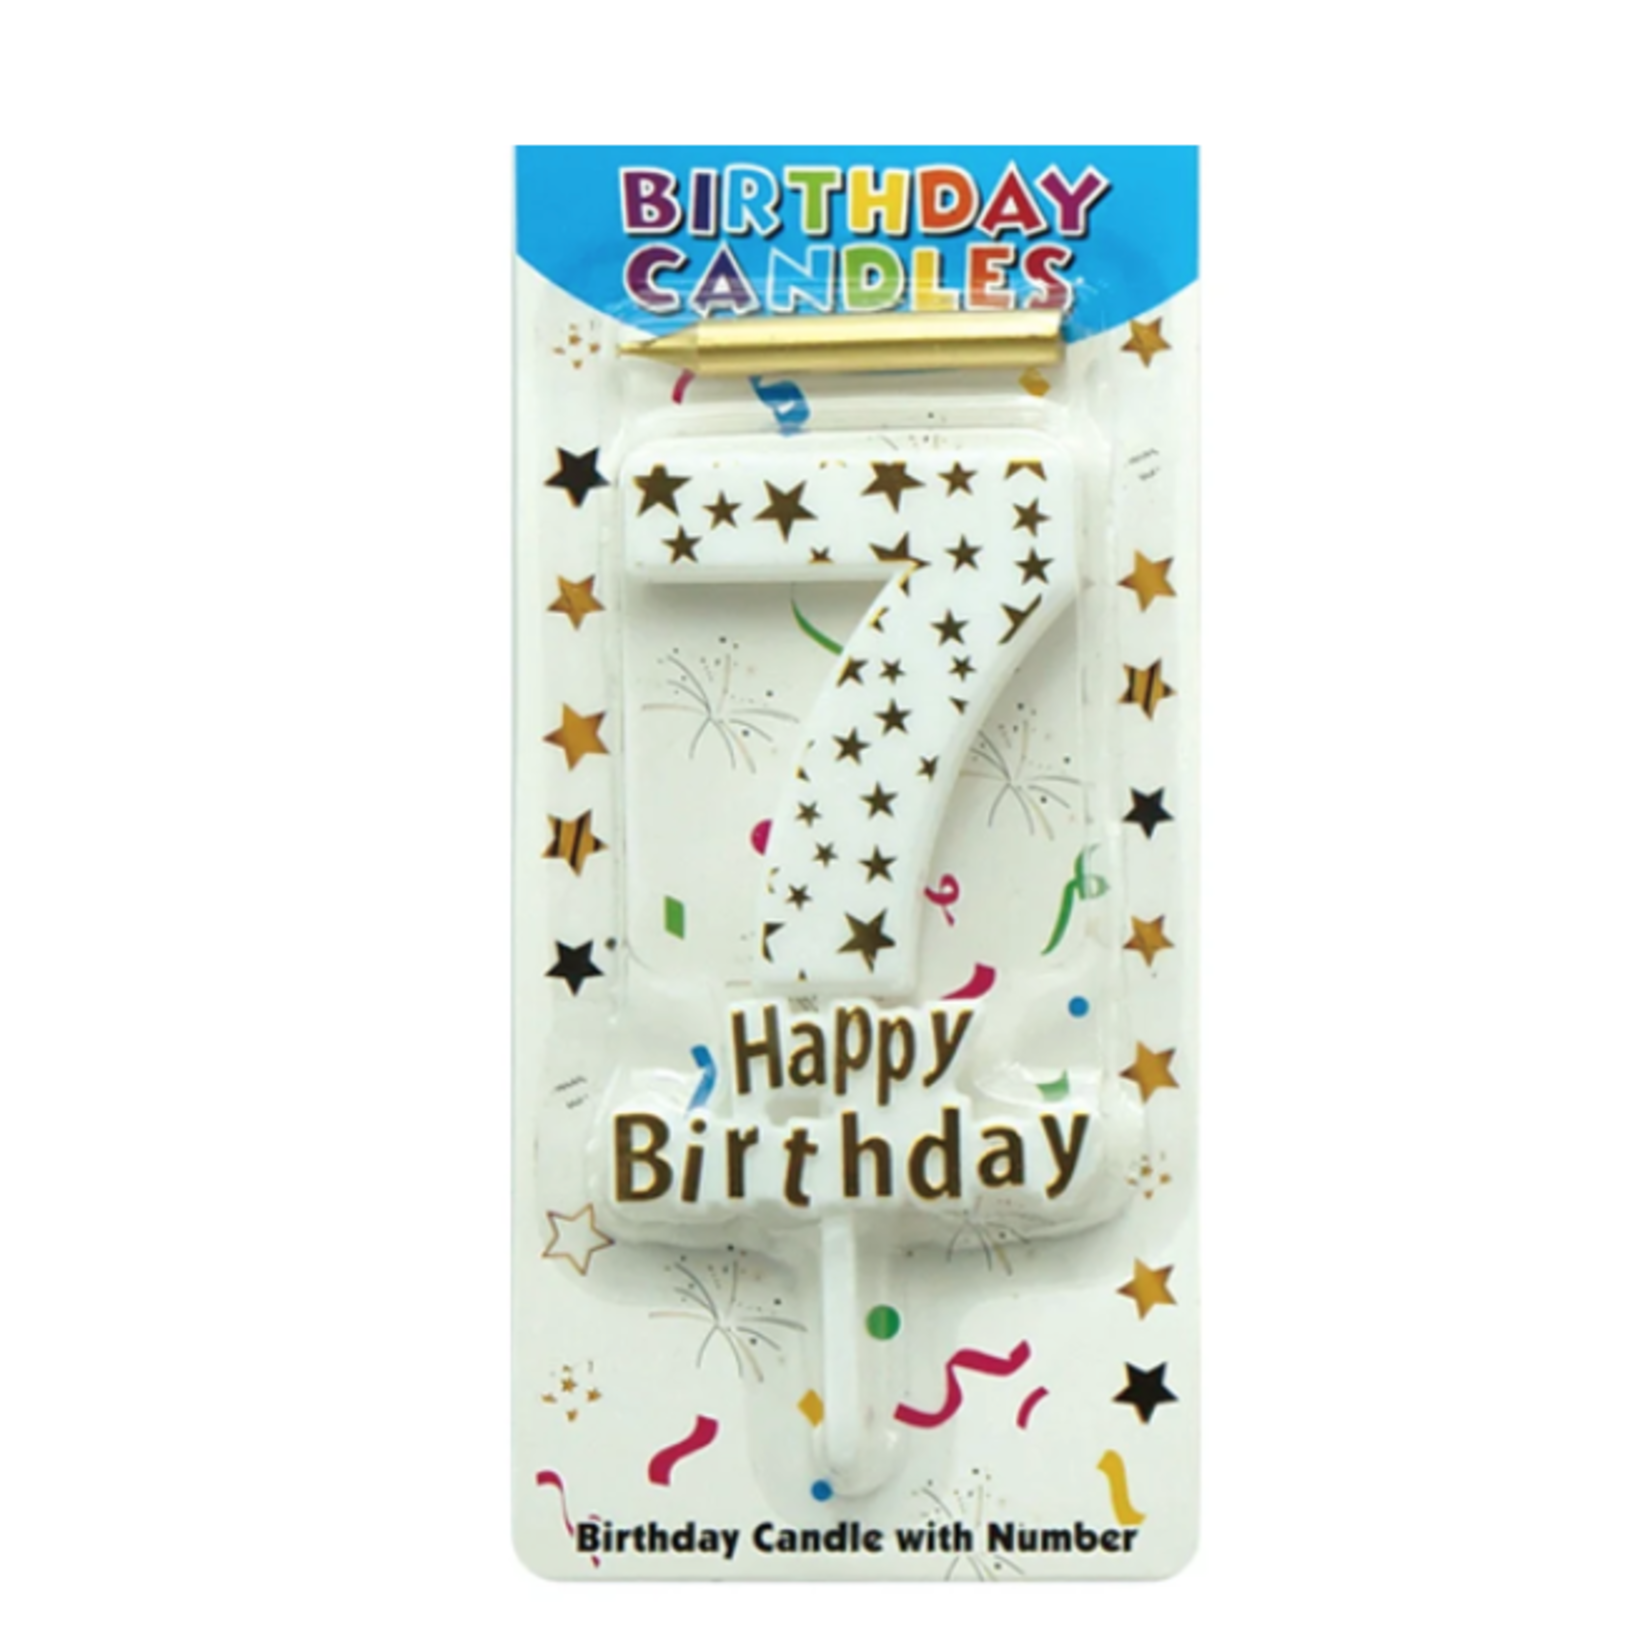 HAPPY BIRTHDAY CANDLE #7 WHITE WITH GOLD STARS